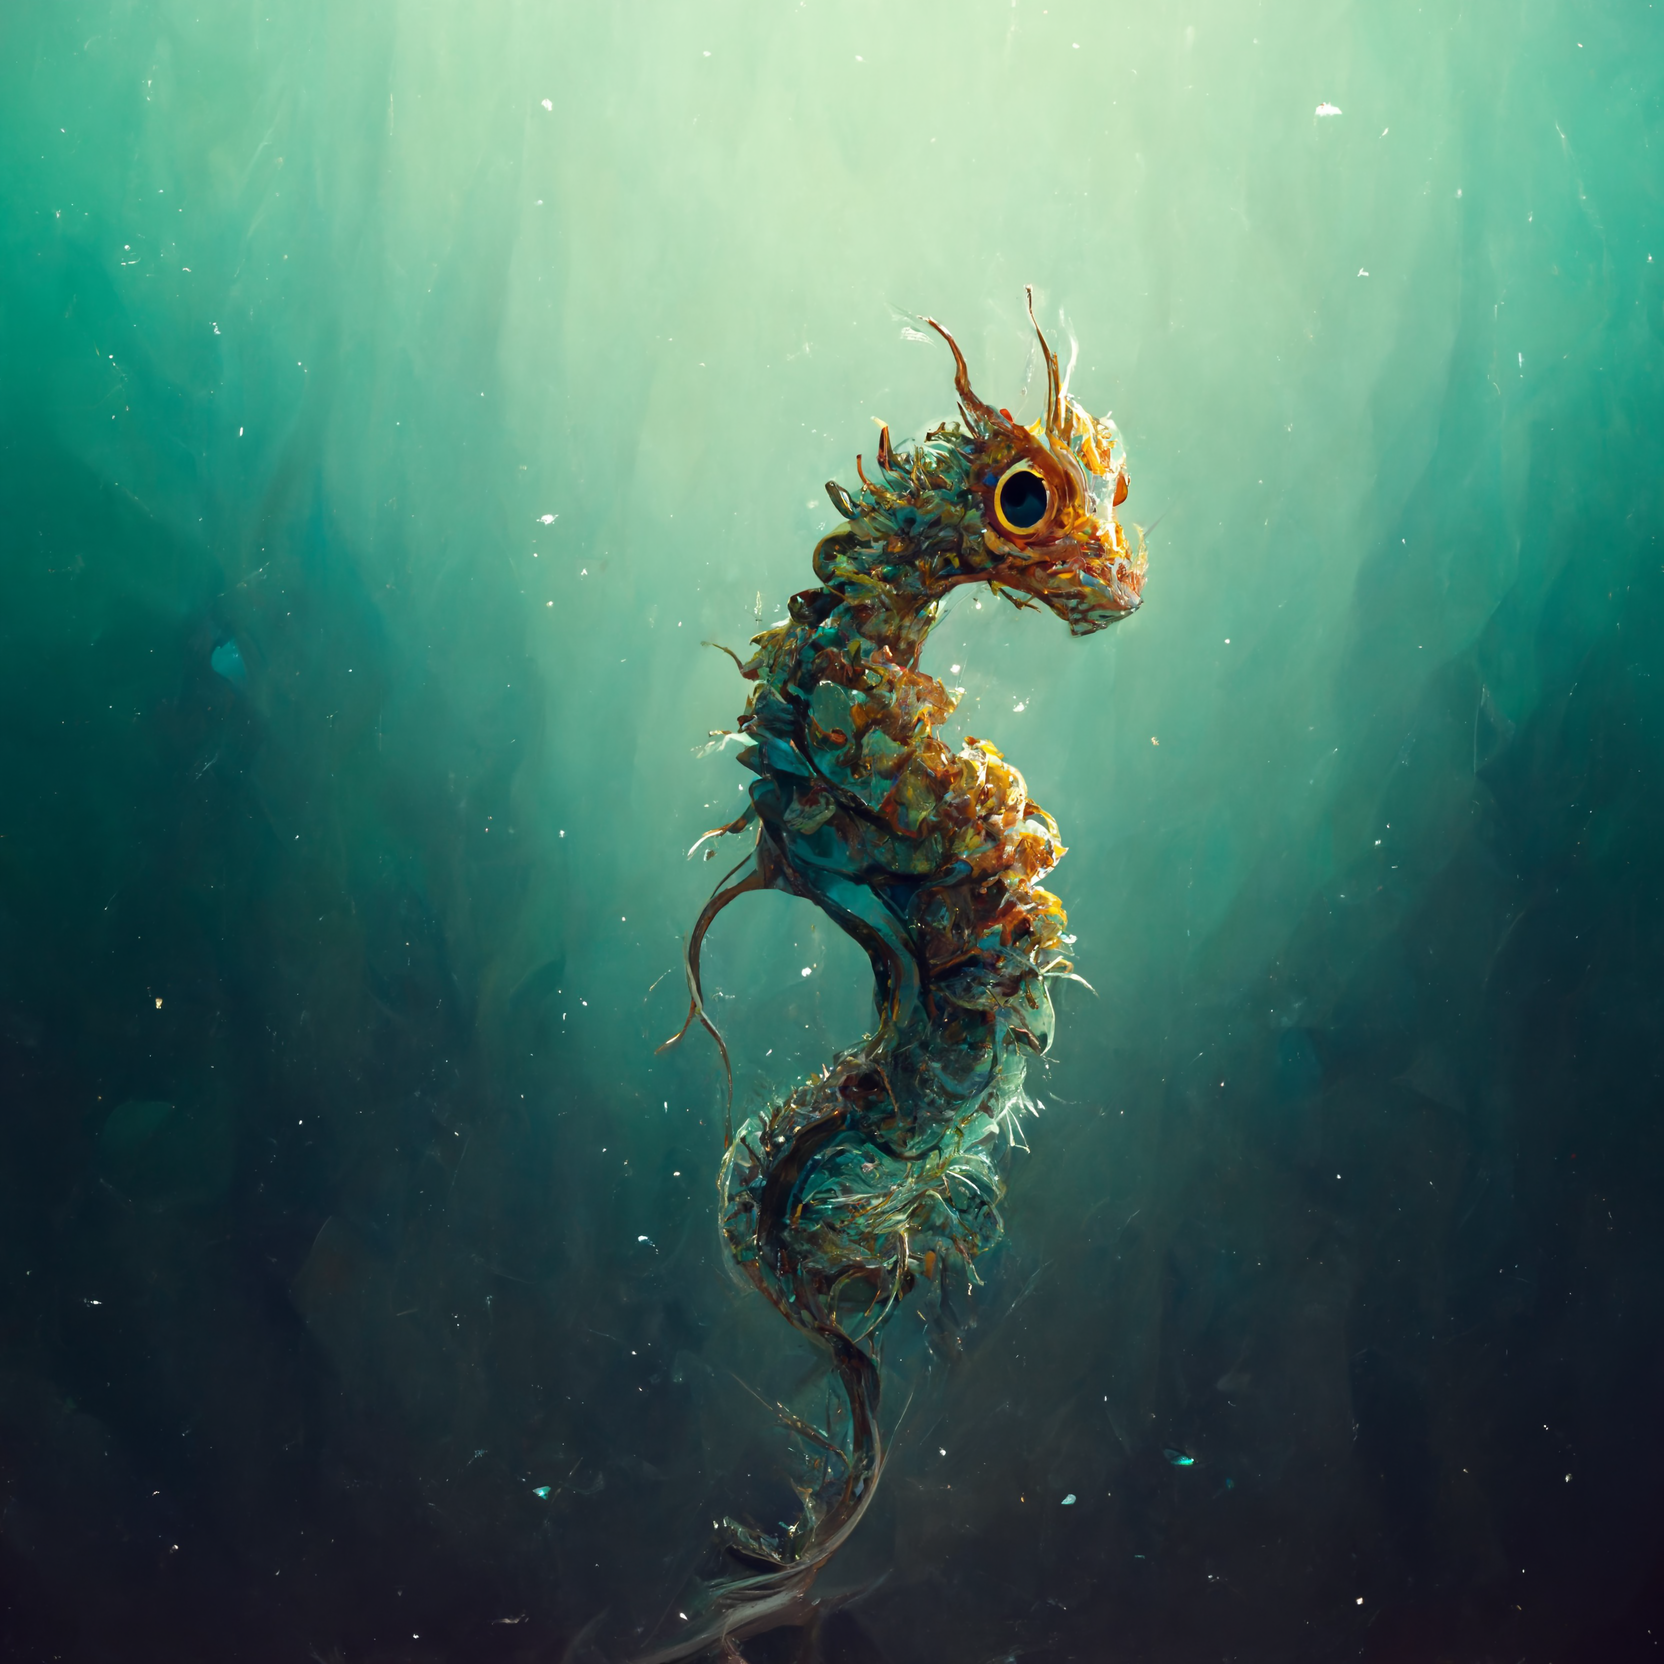 RilaissArt_hybrid_creature_of_a_dragon_and_seahorse_091790a4-5d27-47fd-be69-f3f8a677aaaa.png